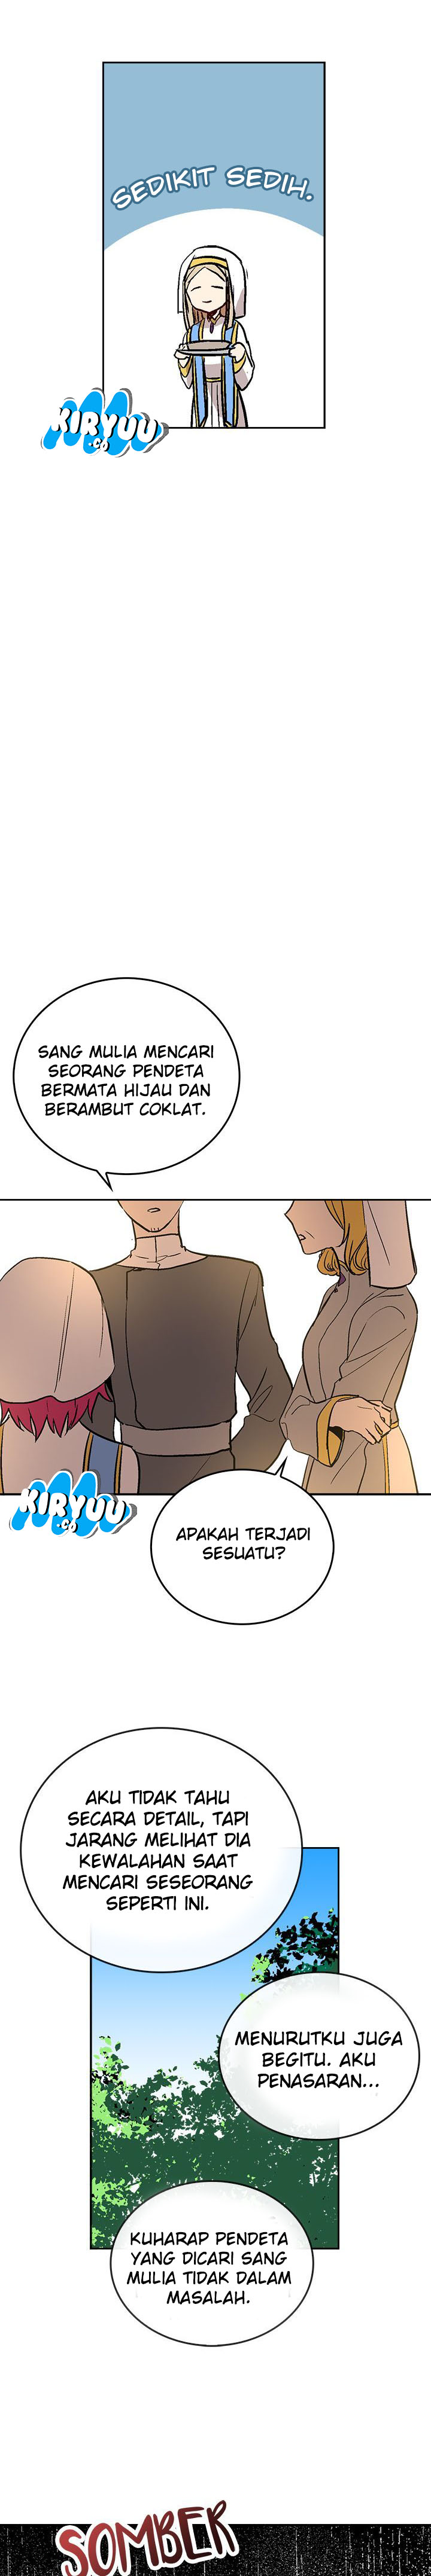 The Reason Why Raeliana Ended up at the Duke’s Mansion Chapter 37